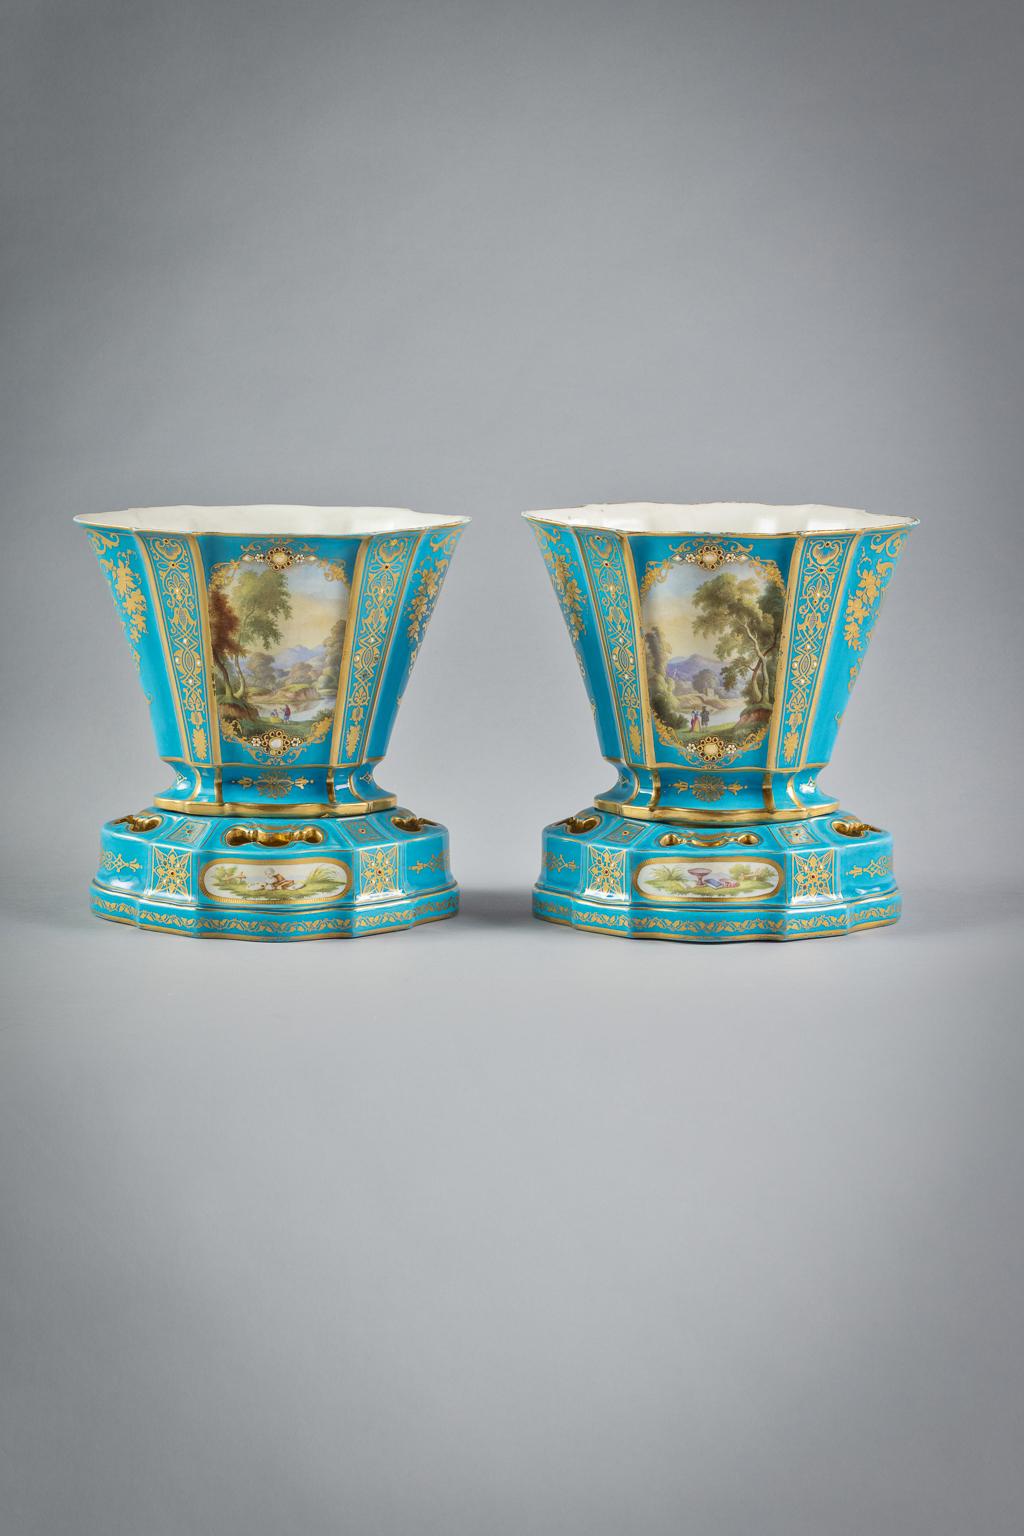 Vase Hollandais, Sevres-style with Sevres mark interlaced L's underneath. The color reserves painted on either side with mythological and pastural scenes within tooled gilt and jeweled cartouches, the other panels with gilt abstract floral and